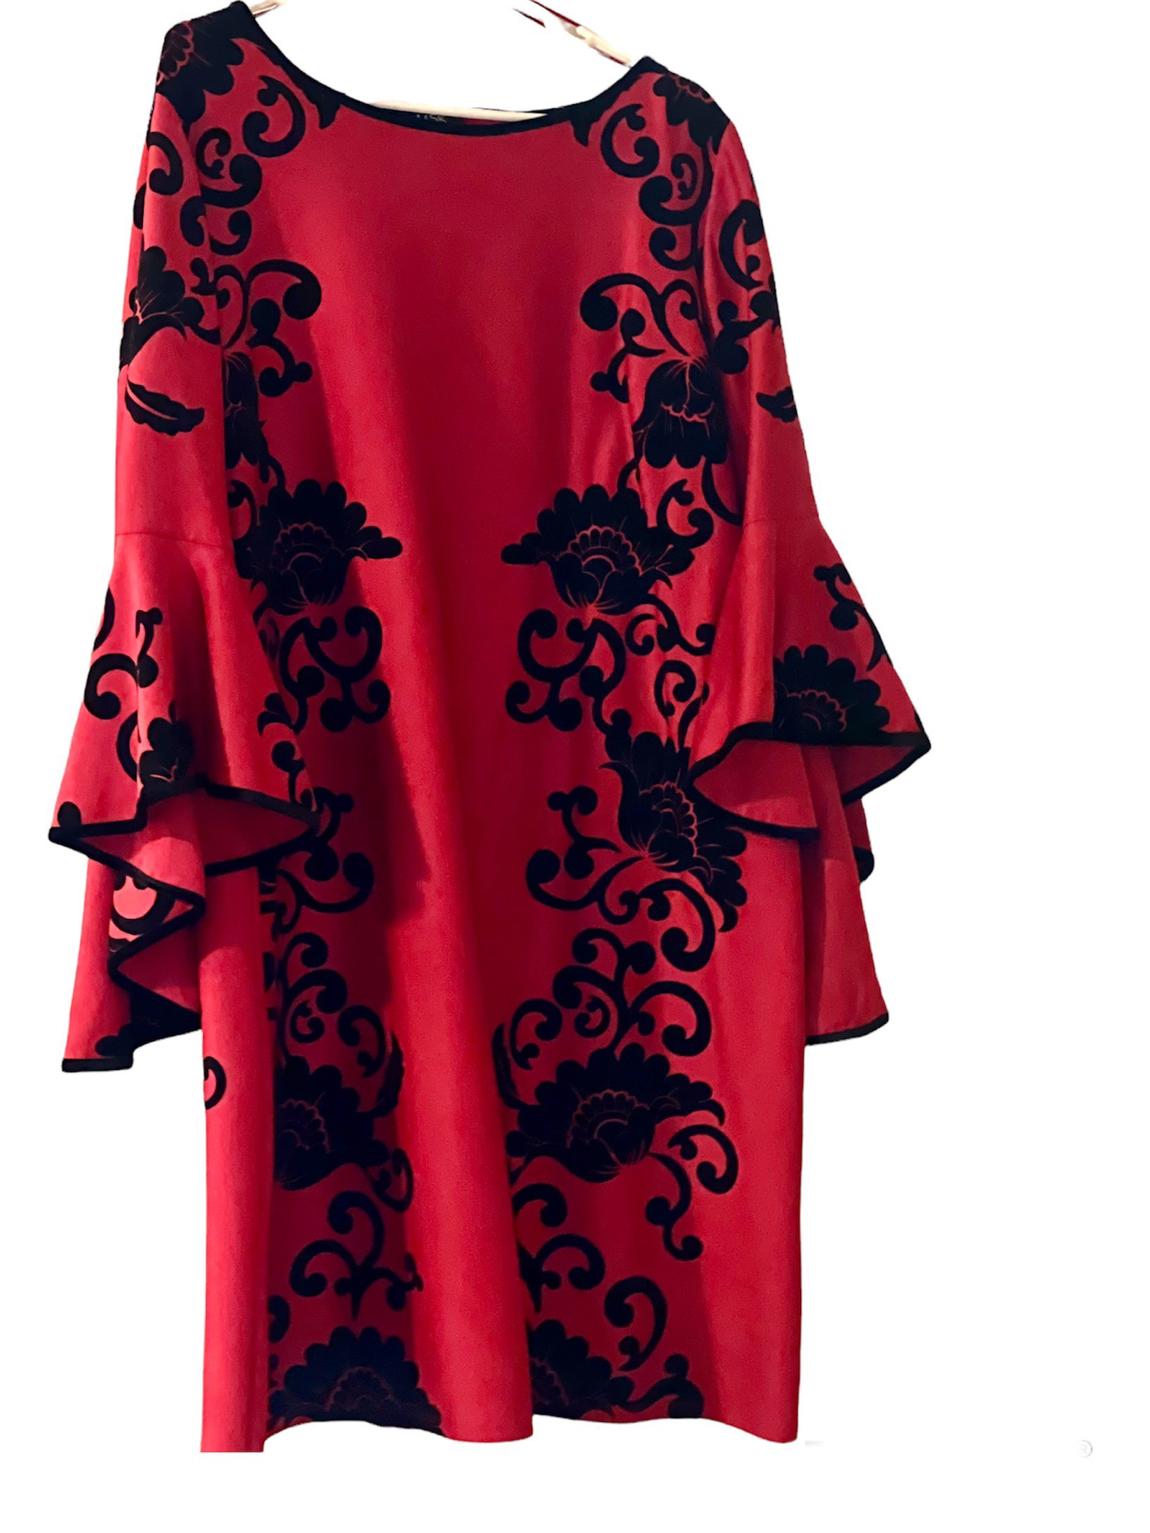 Plus Size 20 Red Cocktail Dress on Queenly